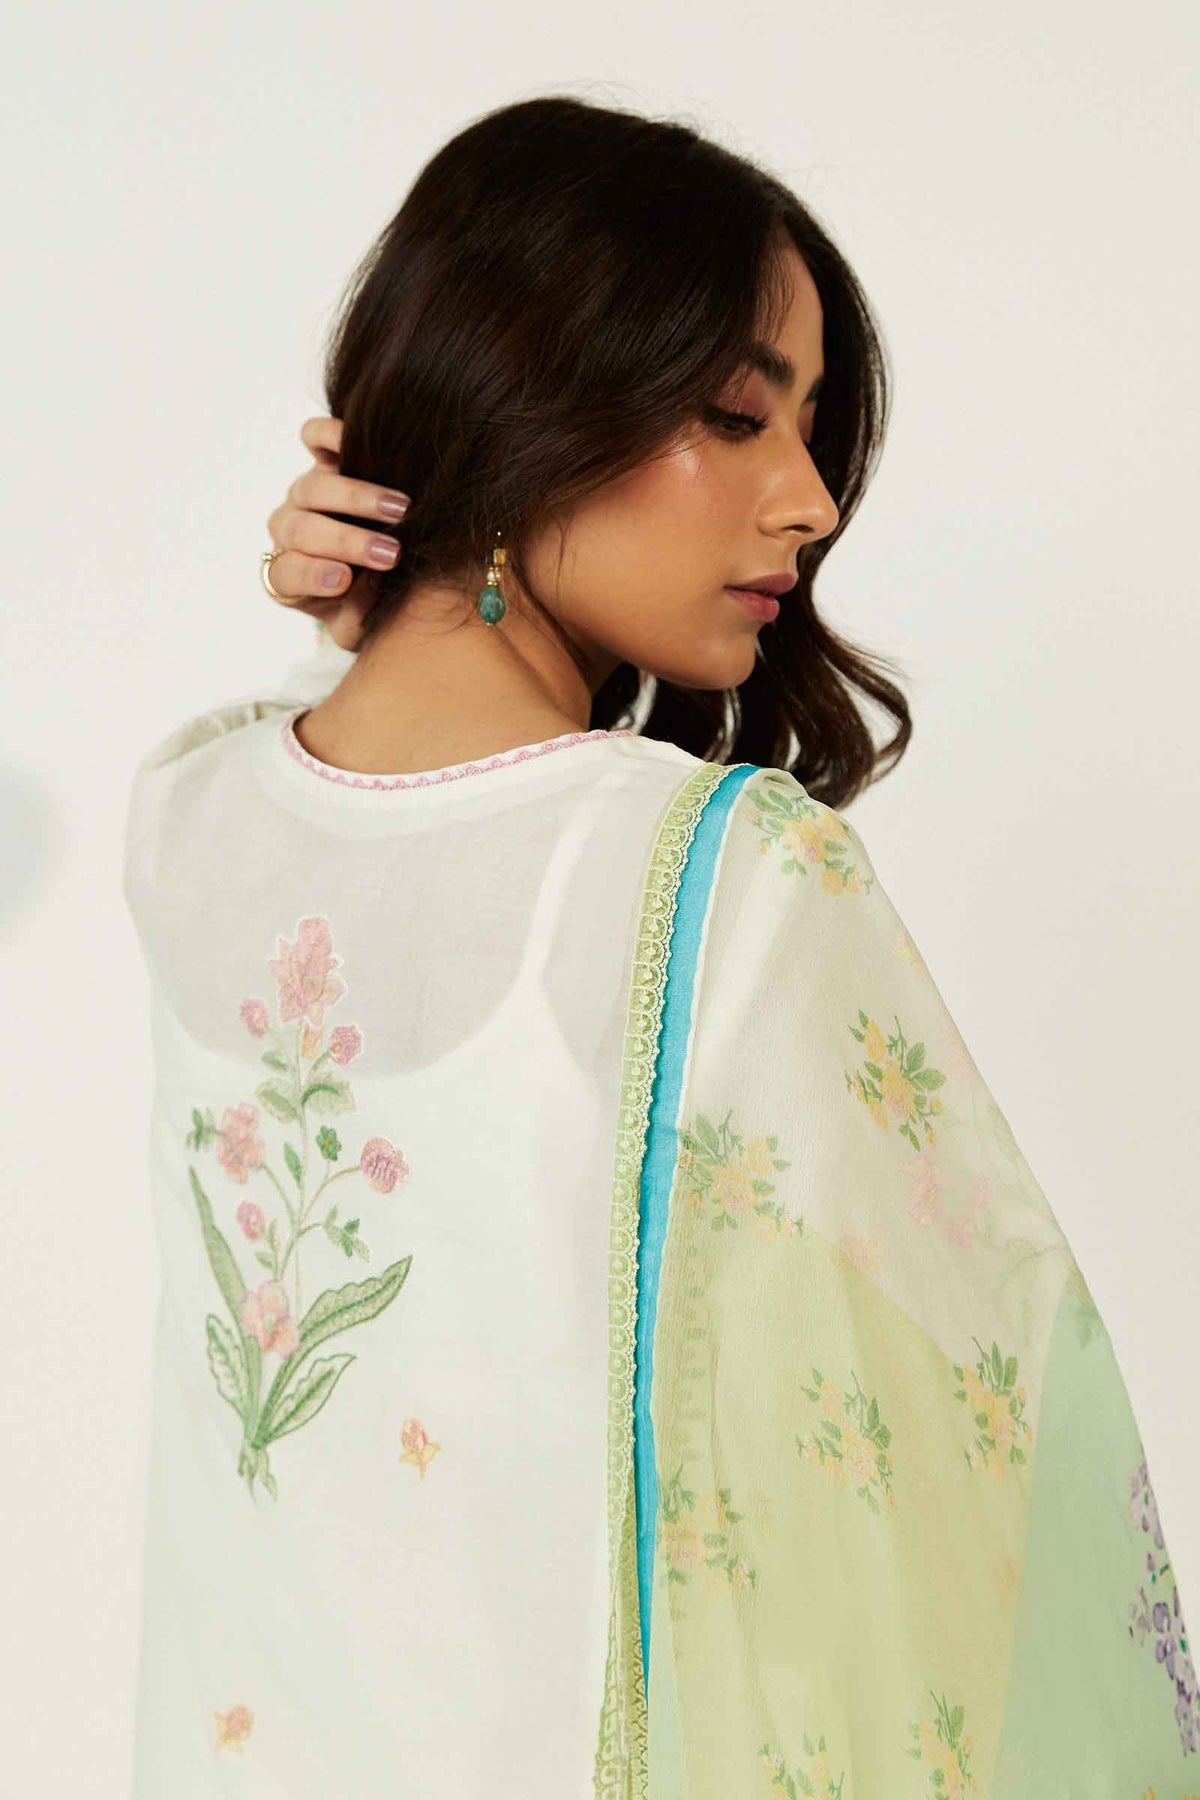 Buy Now, 6A - Coco Lawn Collection Vol.2 - Zara Shahjahan - Coco by Zara Shahjahan - Shahana Collection UK - Wedding and Bridal Party Dresses - Summer Lawn 2023